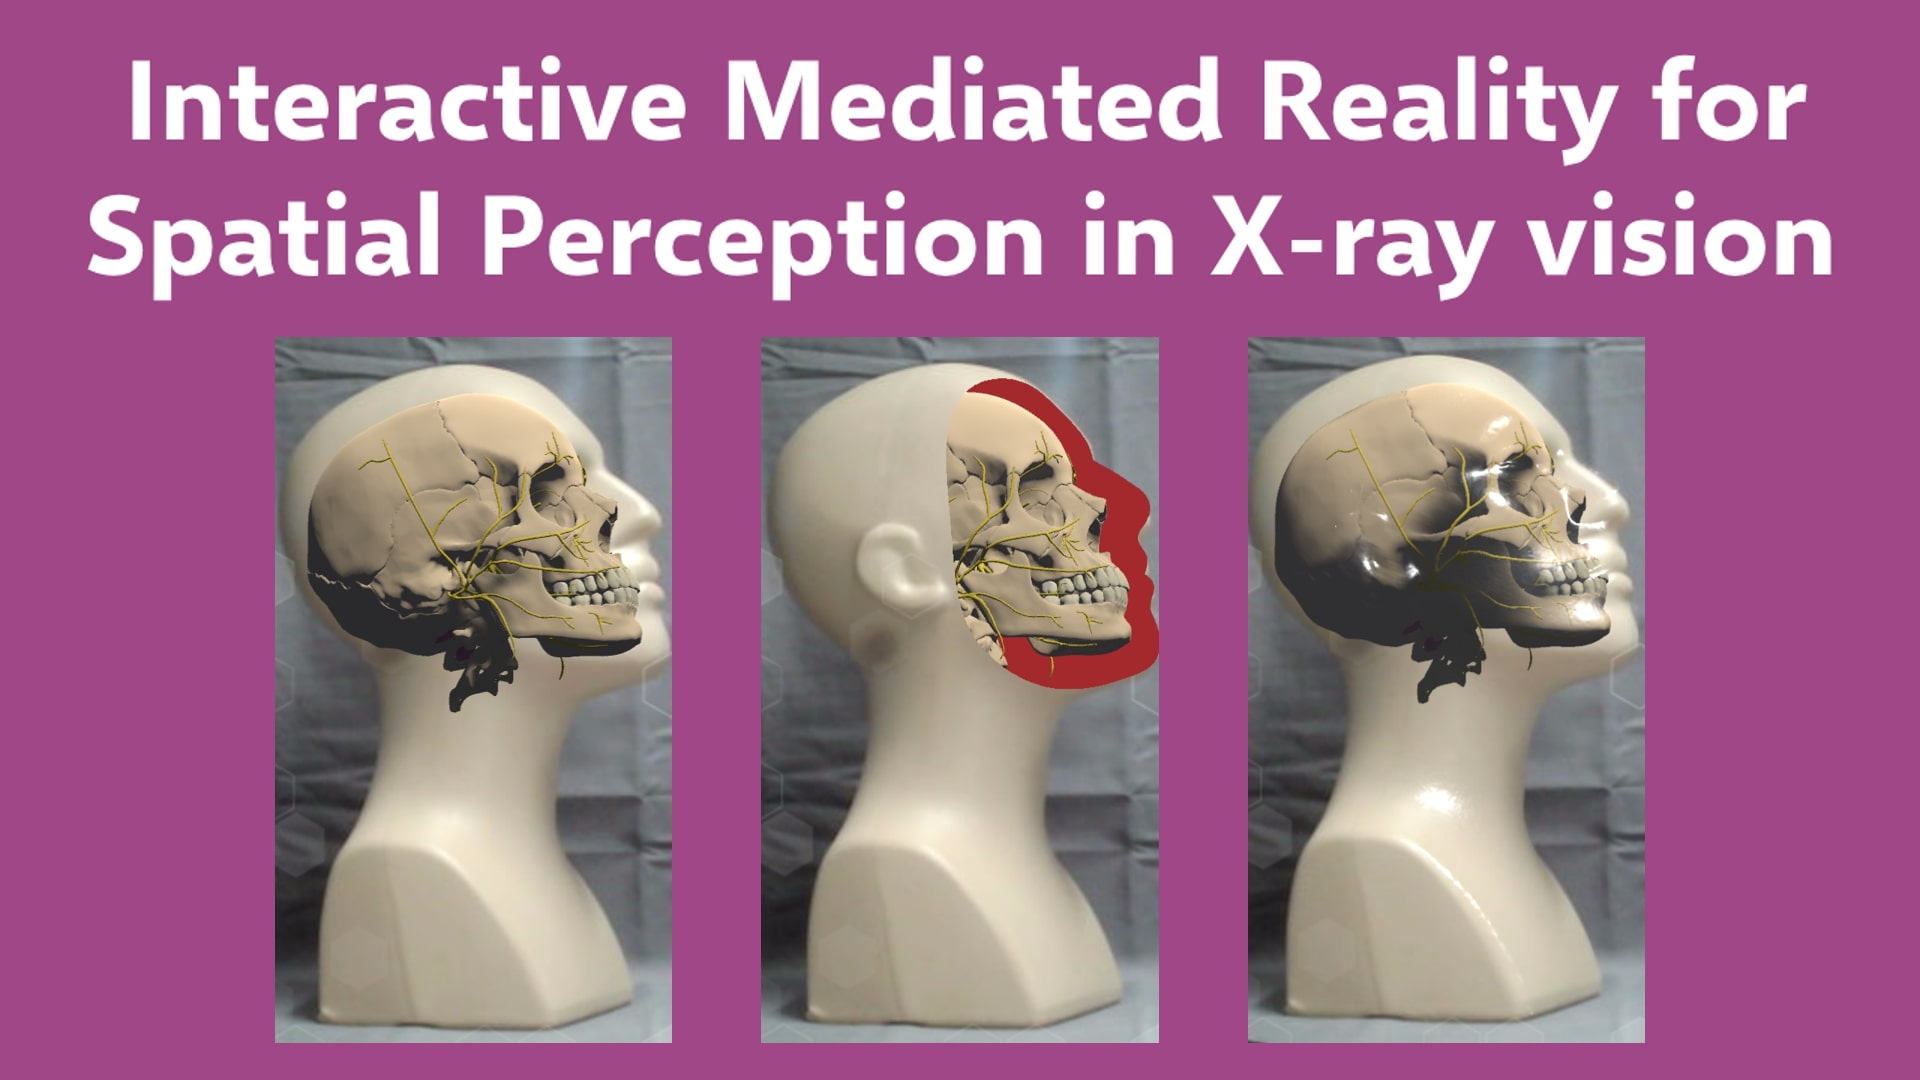 A pink background with white text that says: "Interactive Mediated Reality for Spatial Perception in X-ray vision". Below the writing are three images of skulls overlaid on a head statue.